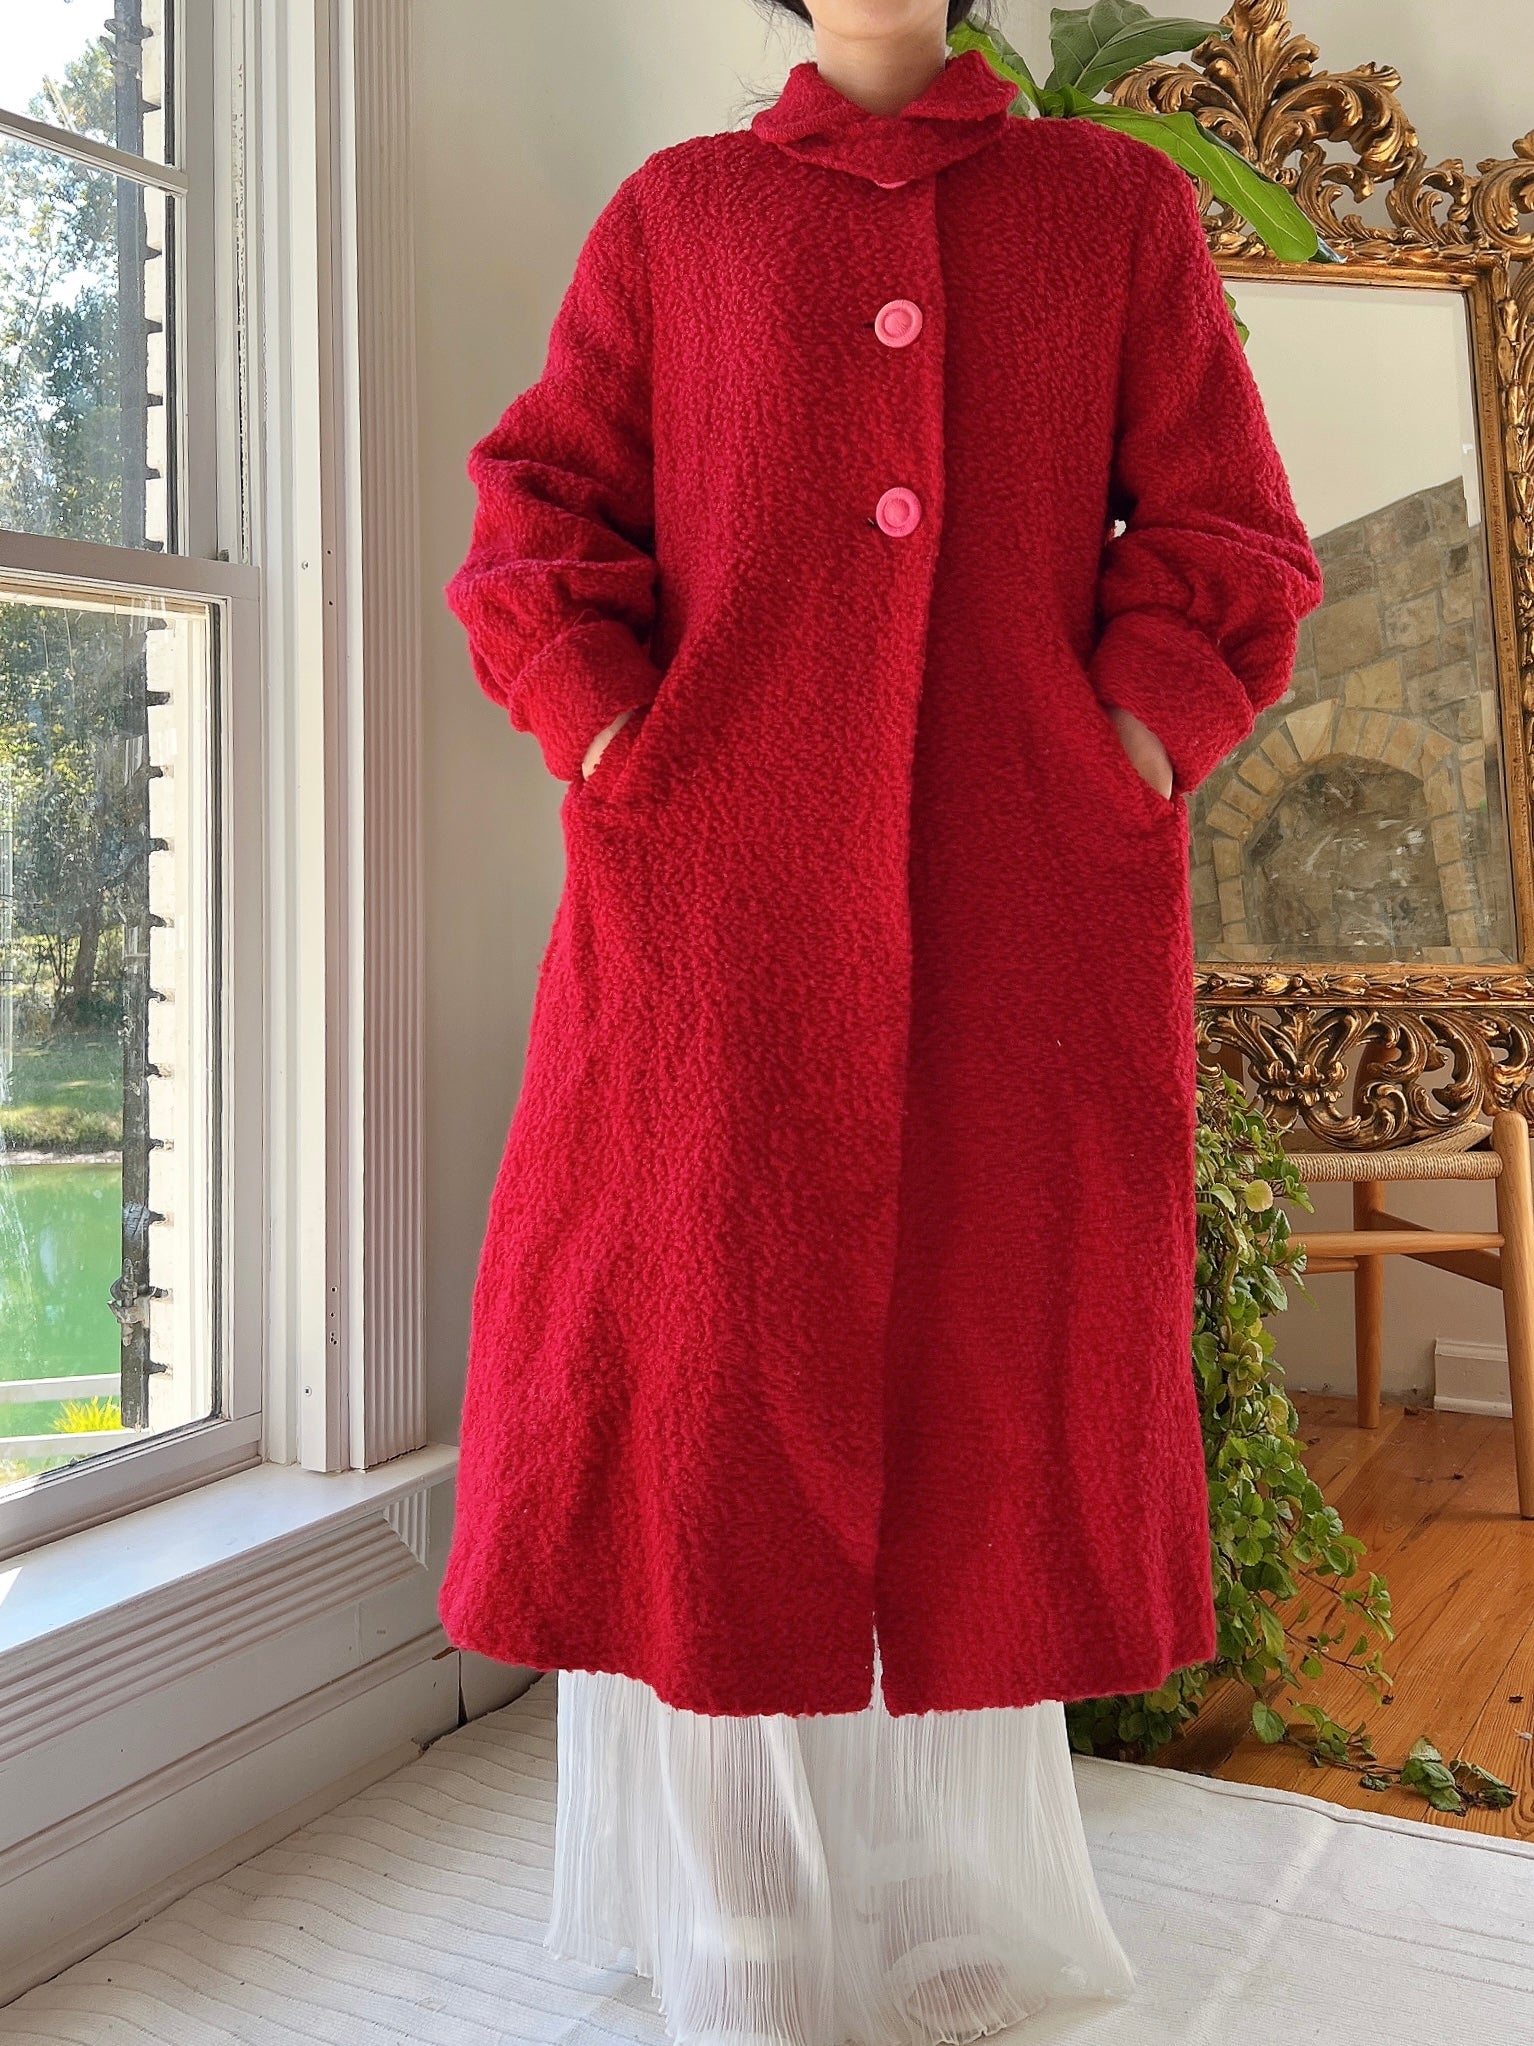 1960s Red Boucle Wool Coat  - M/L